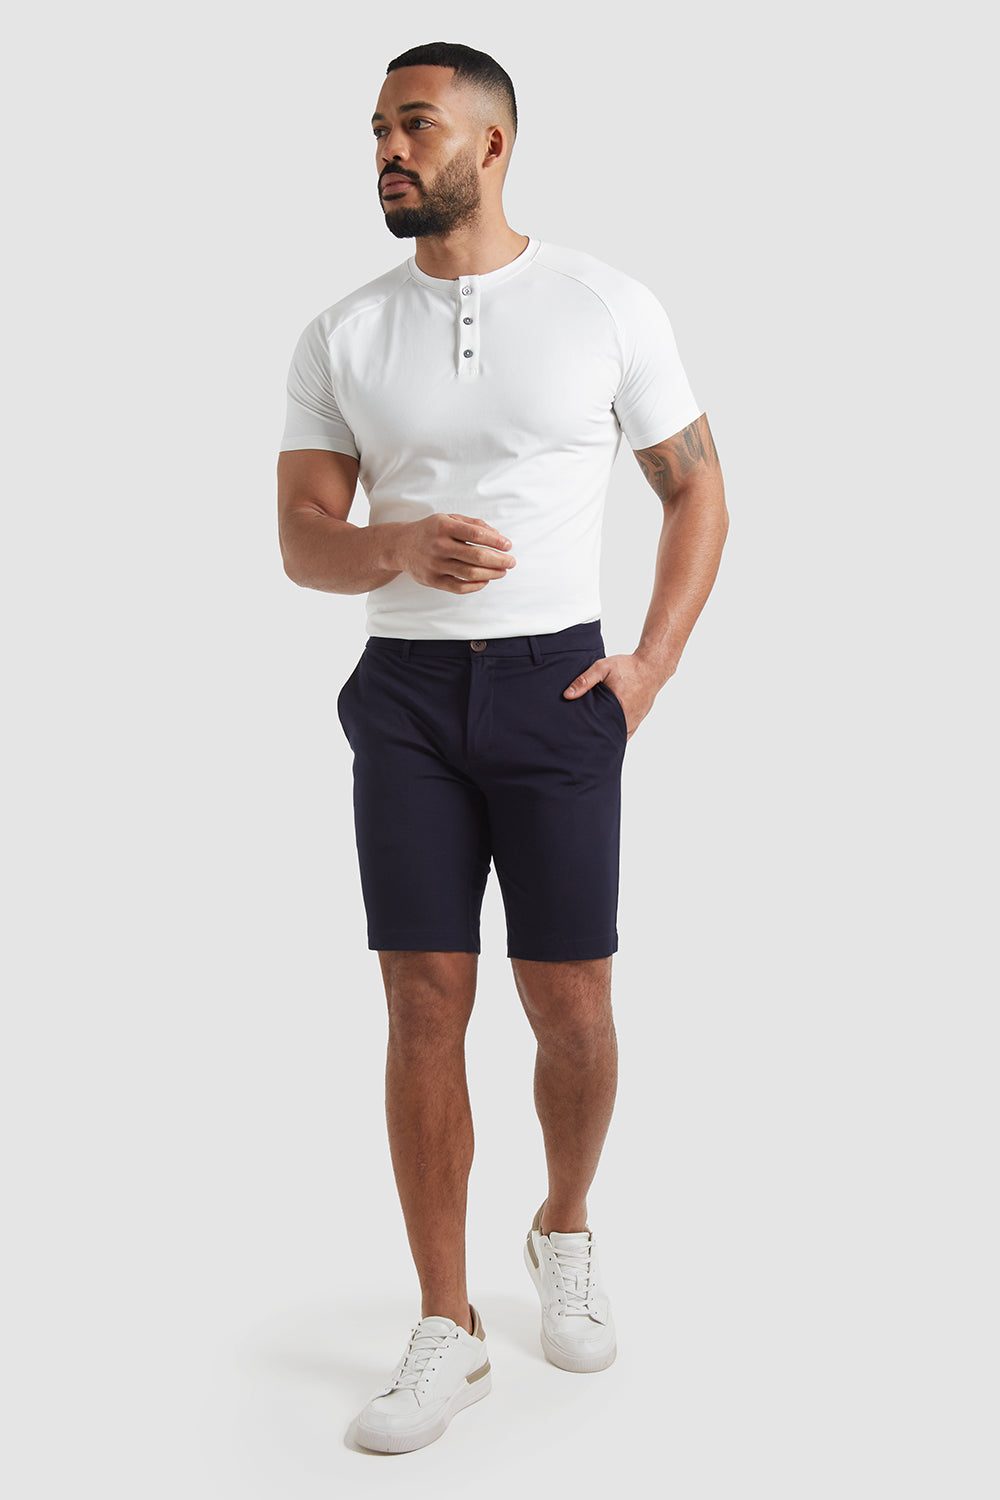 TAILORED Chino Navy ATHLETE in USA - - Athletic Fit Shorts